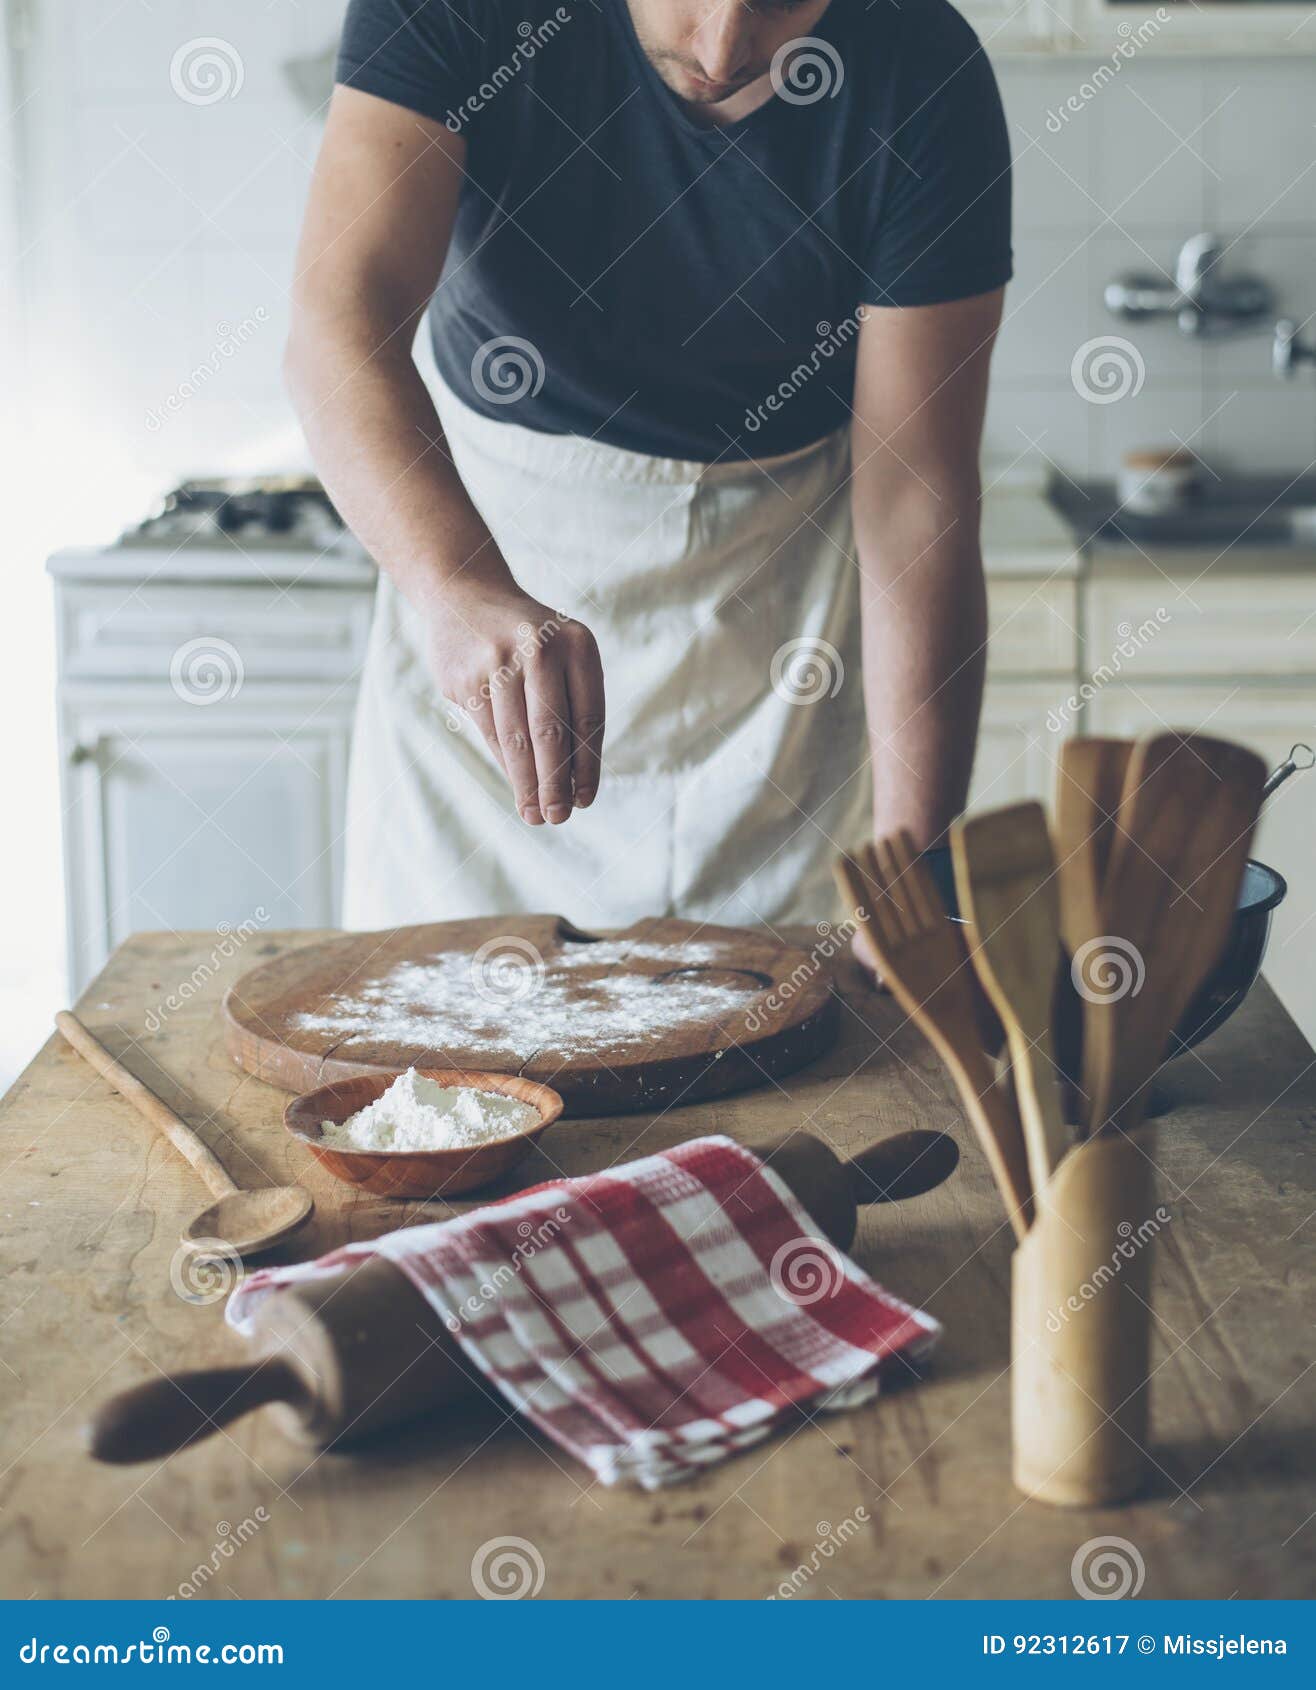 https://thumbs.dreamstime.com/z/chef-making-pastry-kitchen-table-food-baker-man-baking-homemade-bread-dough-vintage-wooden-board-retro-style-image-people-92312617.jpg